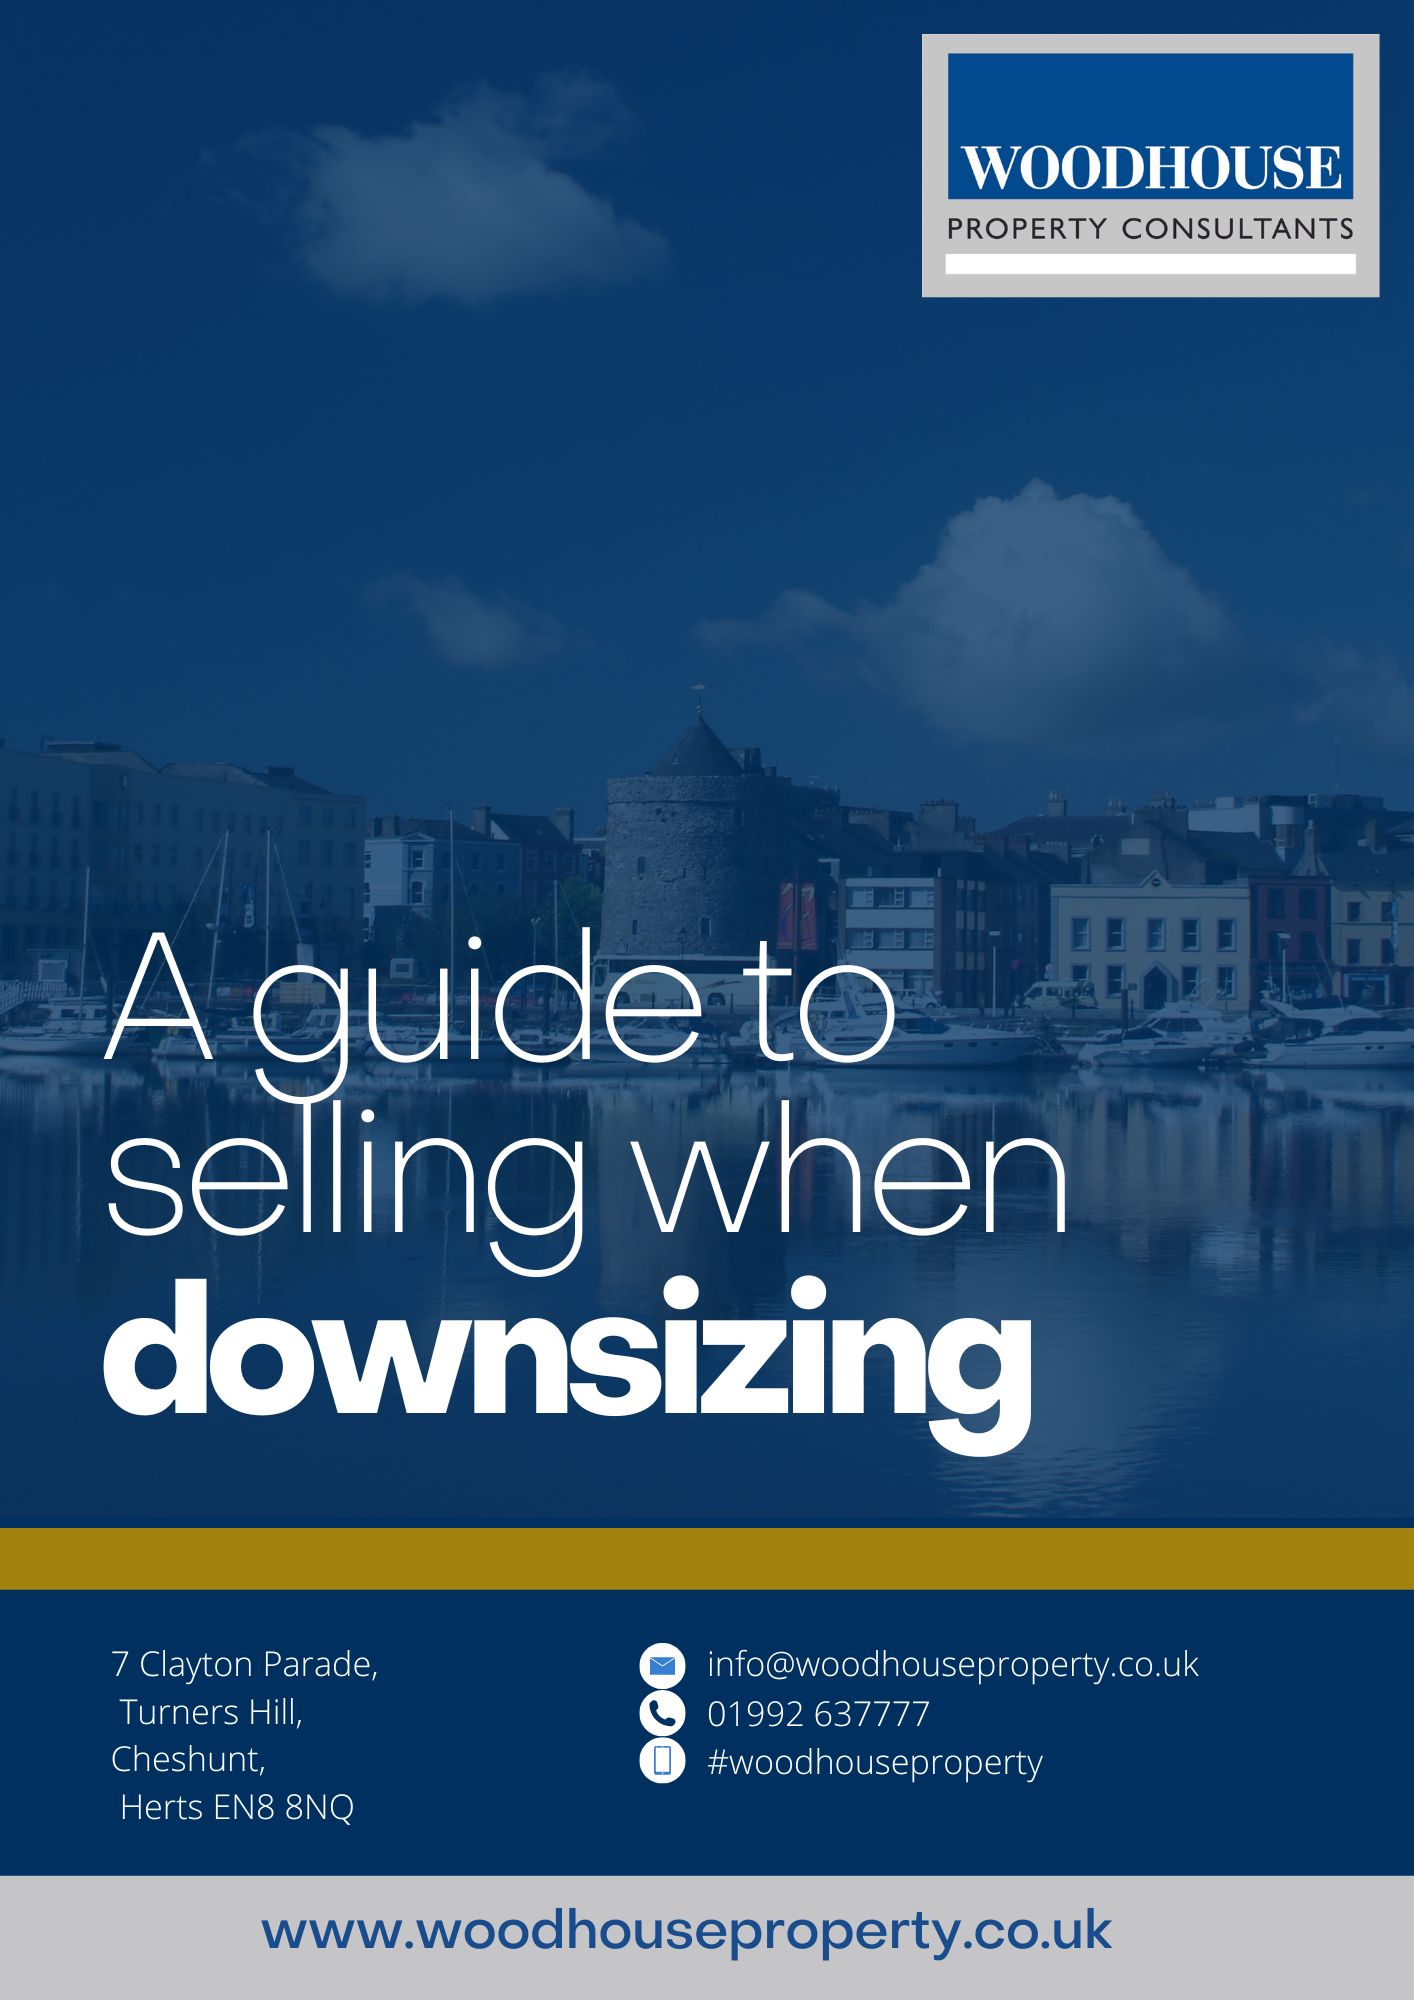 A Guide to Downsizing in Cheshunt